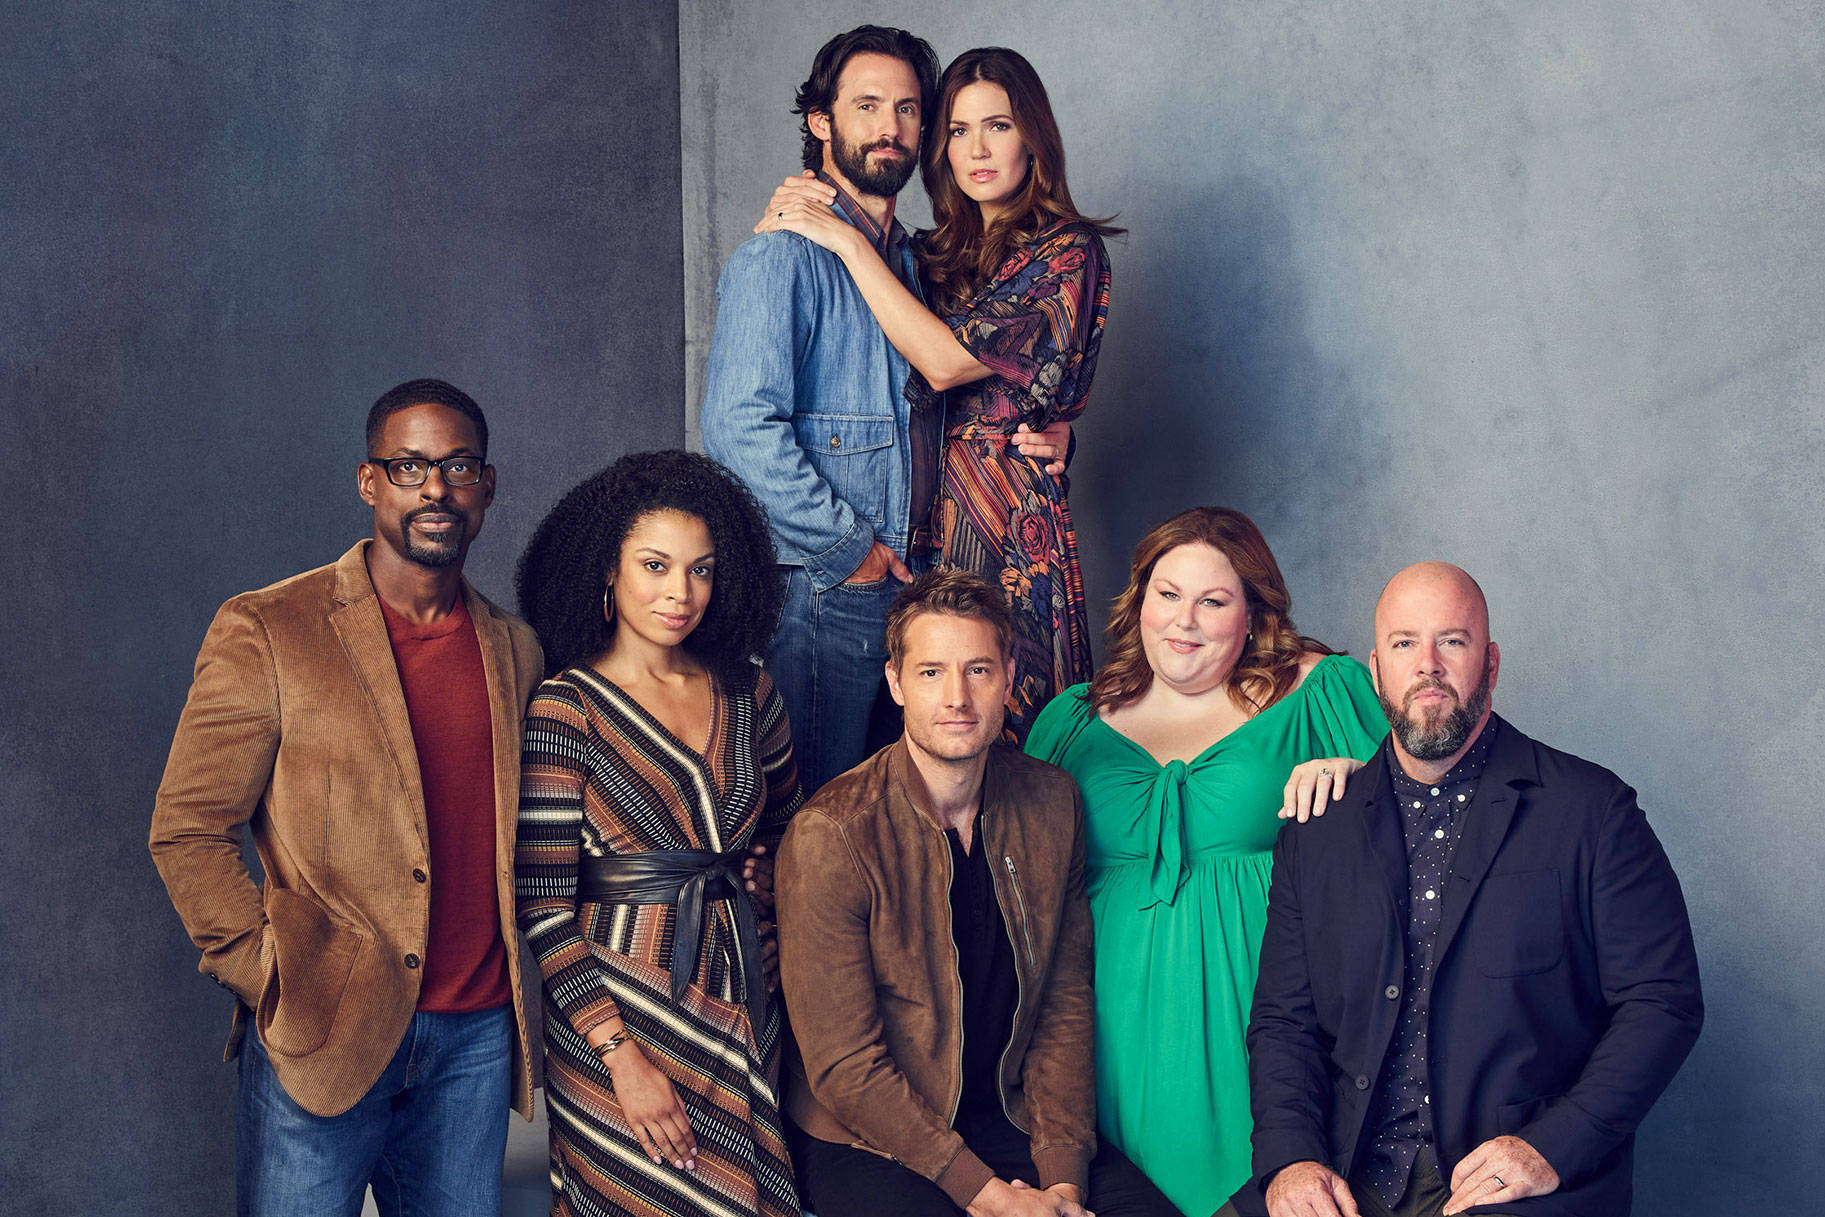 The cast of "This Is Us" in a photoshoot for the series finale Wallpaper